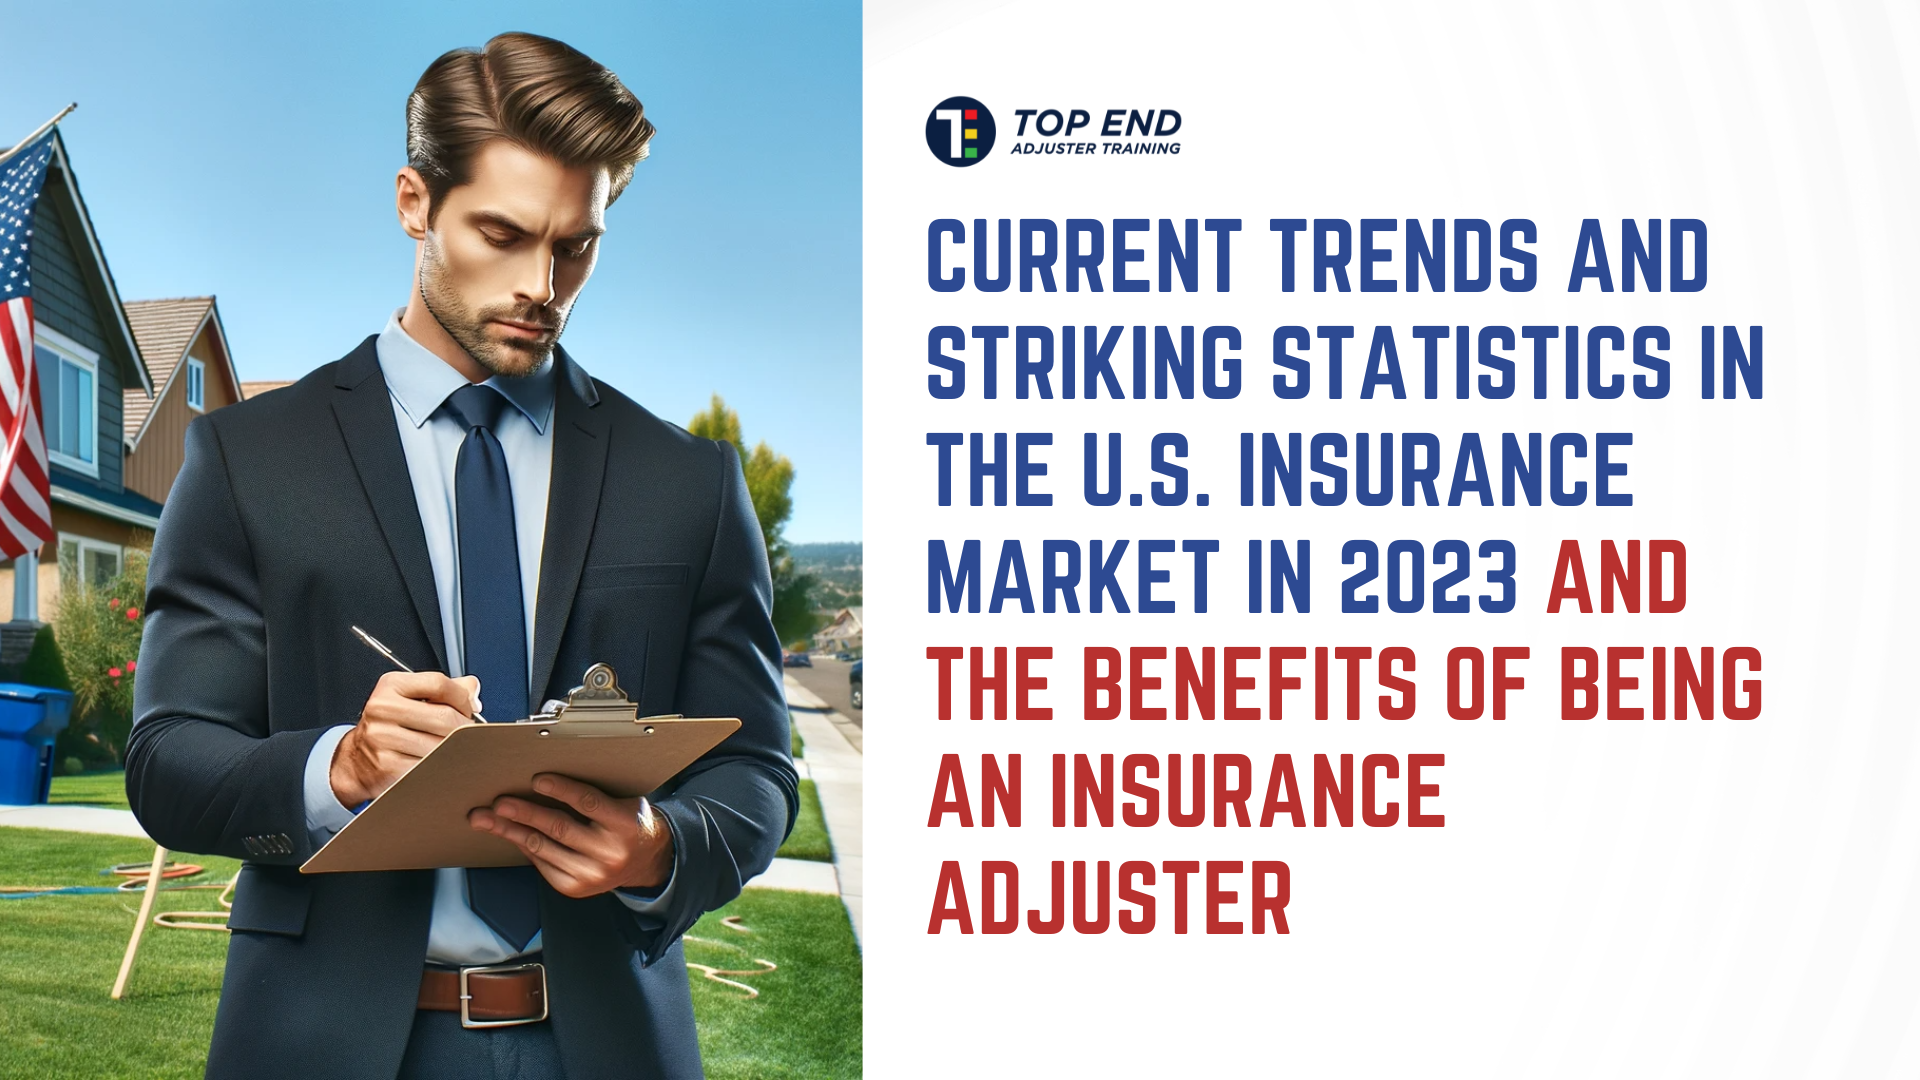 Current Trends And Striking Statistics In The U.S. Insurance Market In 2023 And The Benefits Of Being An Insurance Adjuster 0518173 